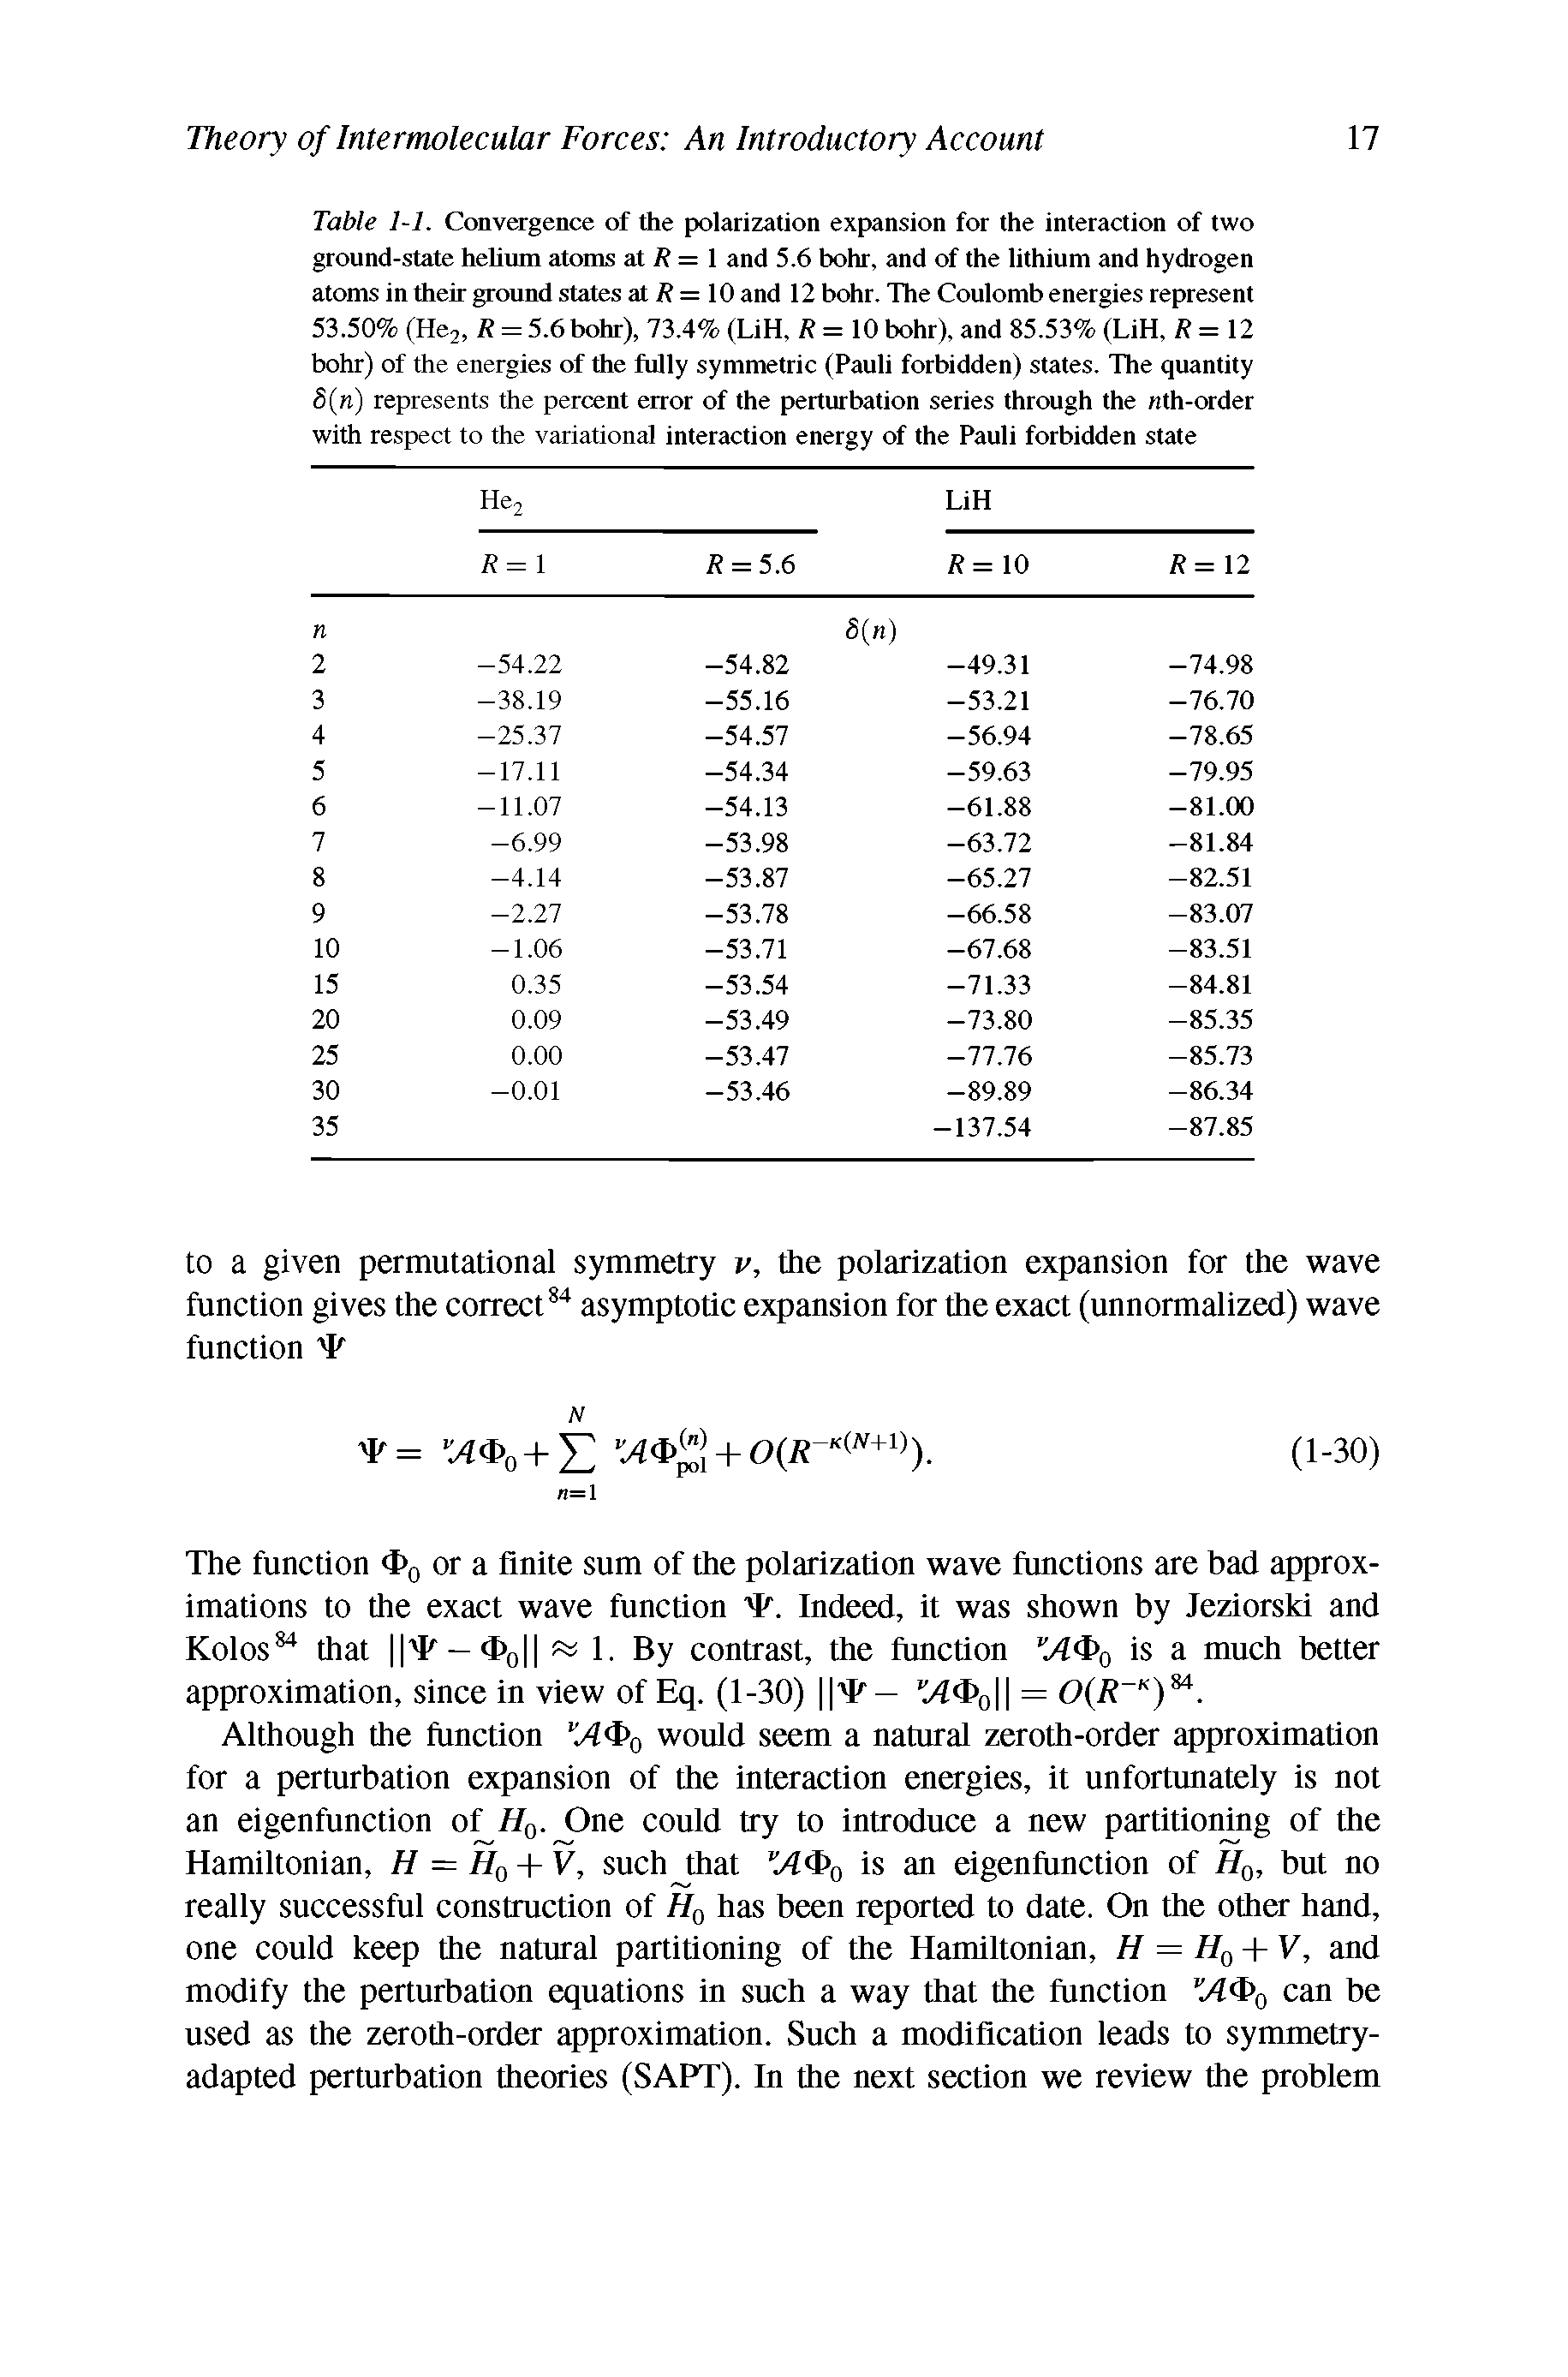 Table 1-1. Convergence of the polarization expansion for the interaction of two ground-state helium atoms at R = 1 and 5.6 bohr, and of the lithium and hydrogen atoms in their ground states at R = 10 and 12 bohr. The Coulomb energies represent 53.50% (He2) R = 5.6bohr), 73.4% (LiH, R = 10 bohr), and 85.53% (LiH, R= 12 bohr) of the energies of the fully symmetric (Pauli forbidden) states. The quantity S(n) represents the percent error of the perturbation series through the nth-order with respect to the variational interaction energy of the Pauli forbidden state...